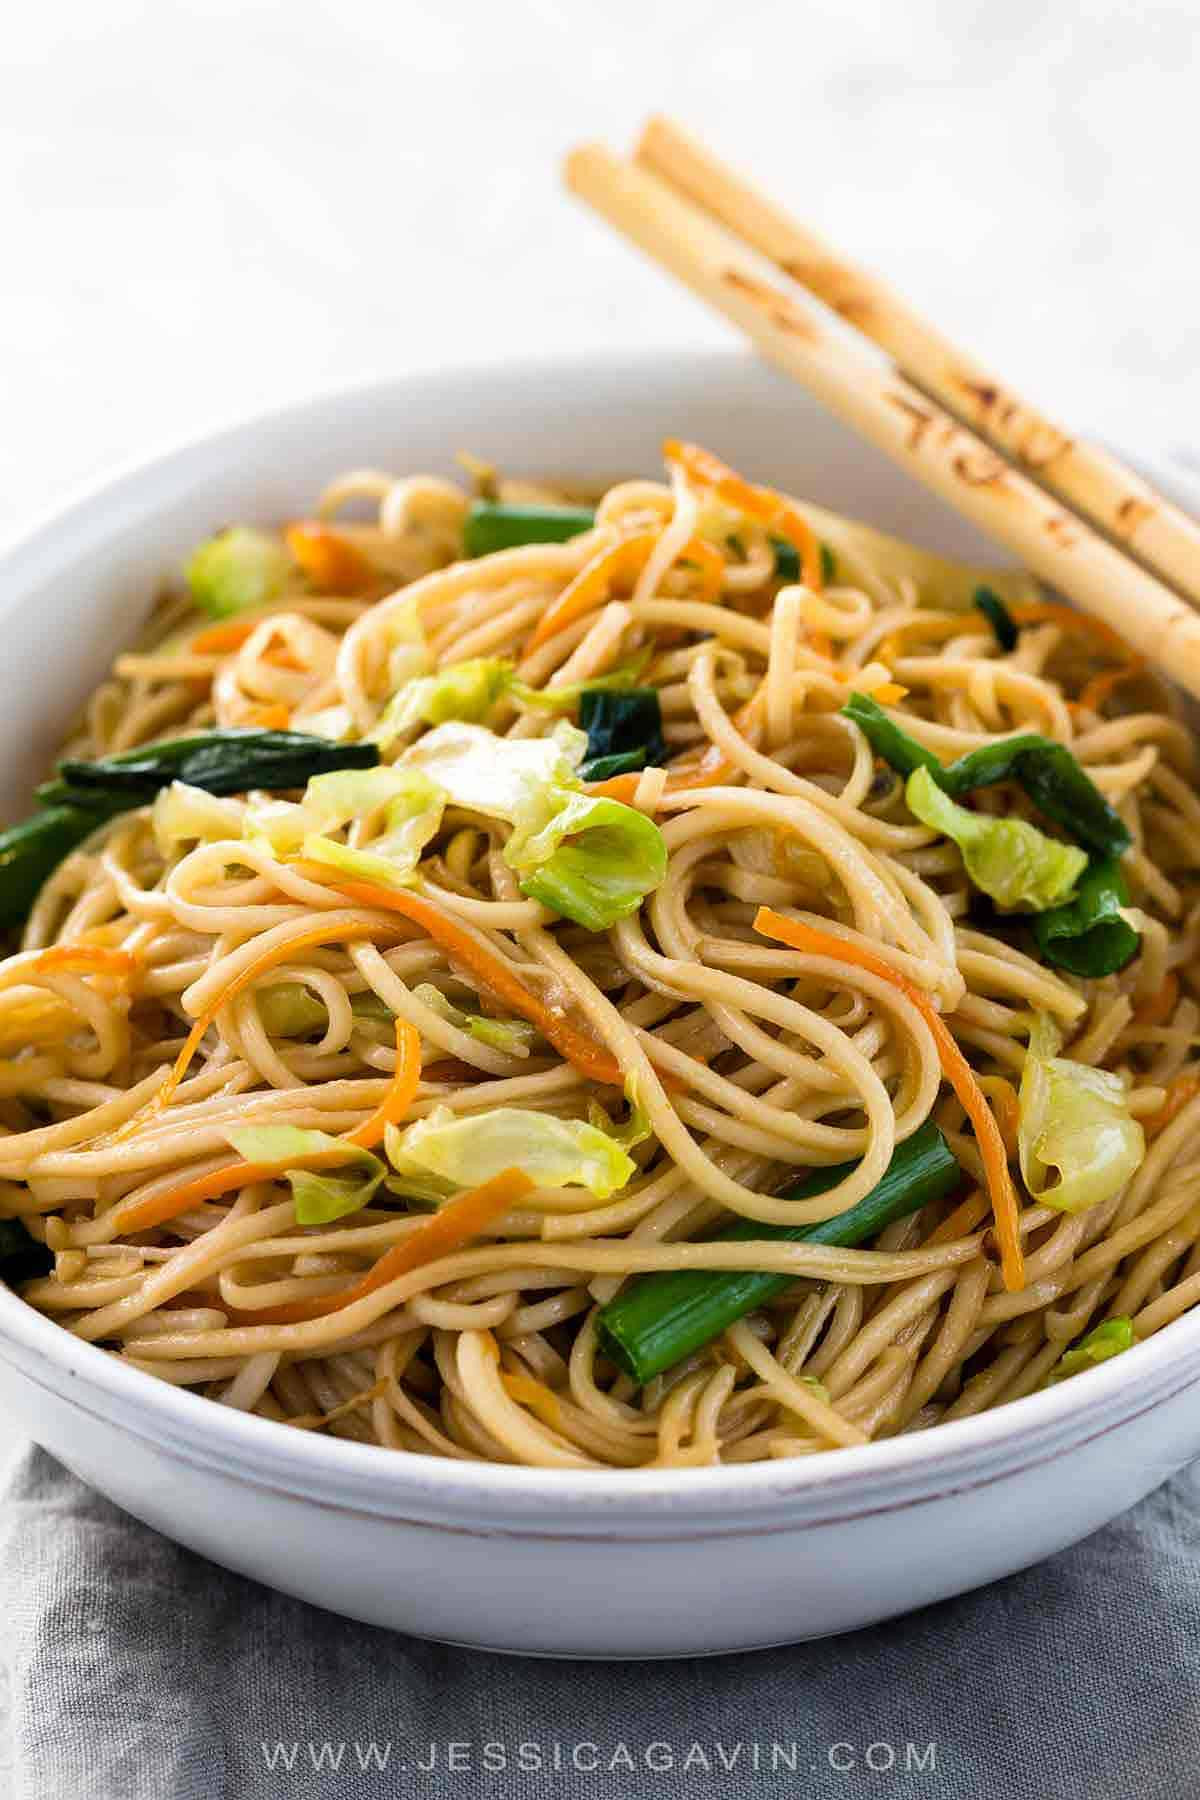 Chinese Chow Mein Recipes
 Chow Mein Recipe Jessica Gavin